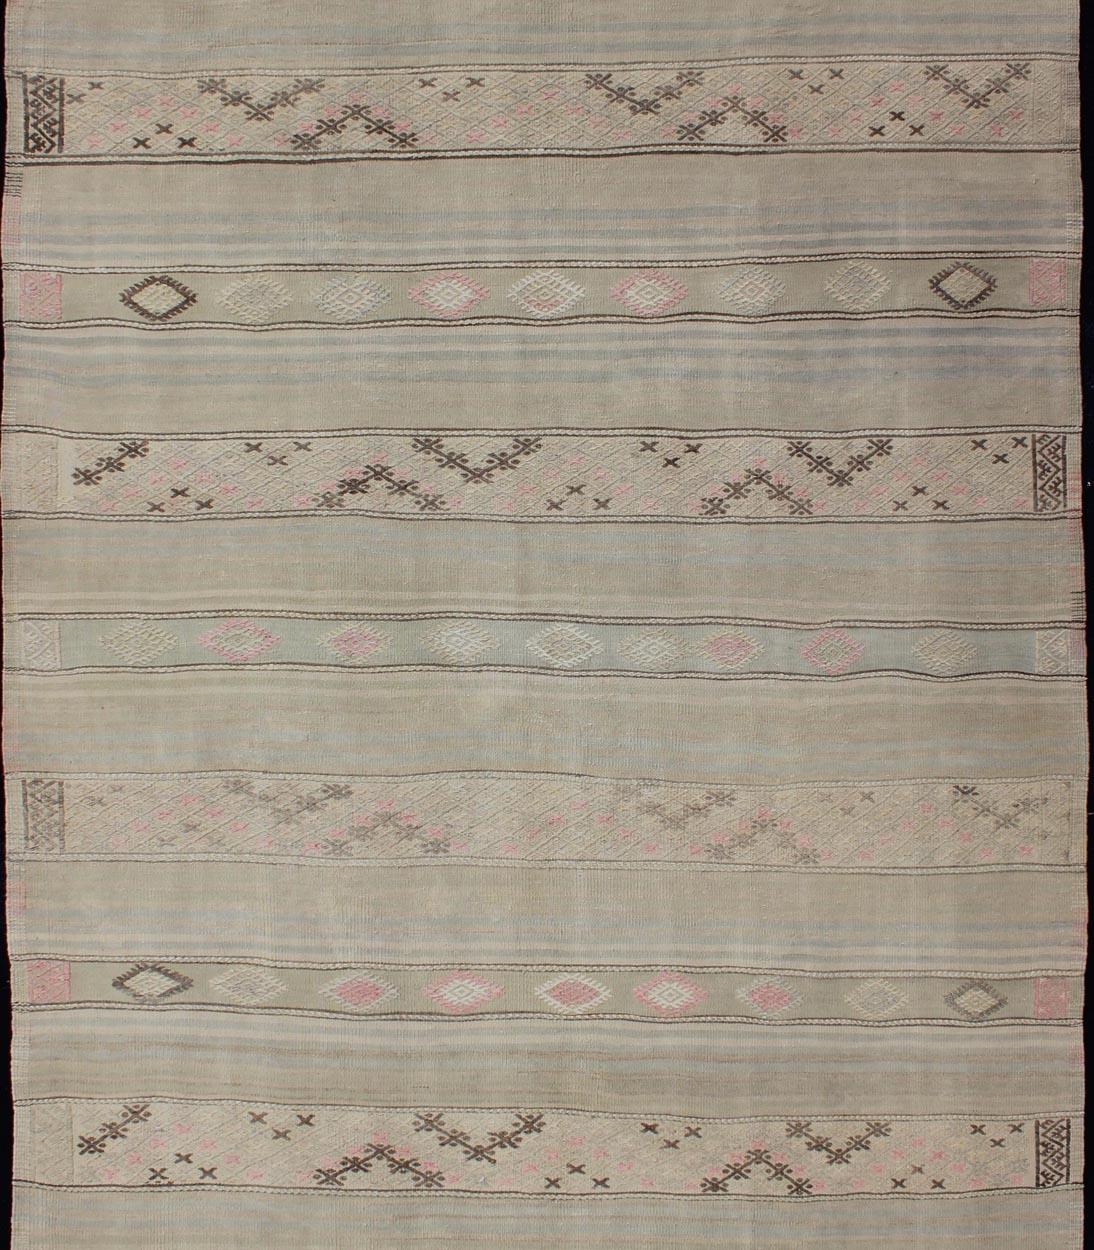 Vintage Turkish Flat-Weave Striped Kilim in Taupe, Pink, and Light Brown In Good Condition For Sale In Atlanta, GA